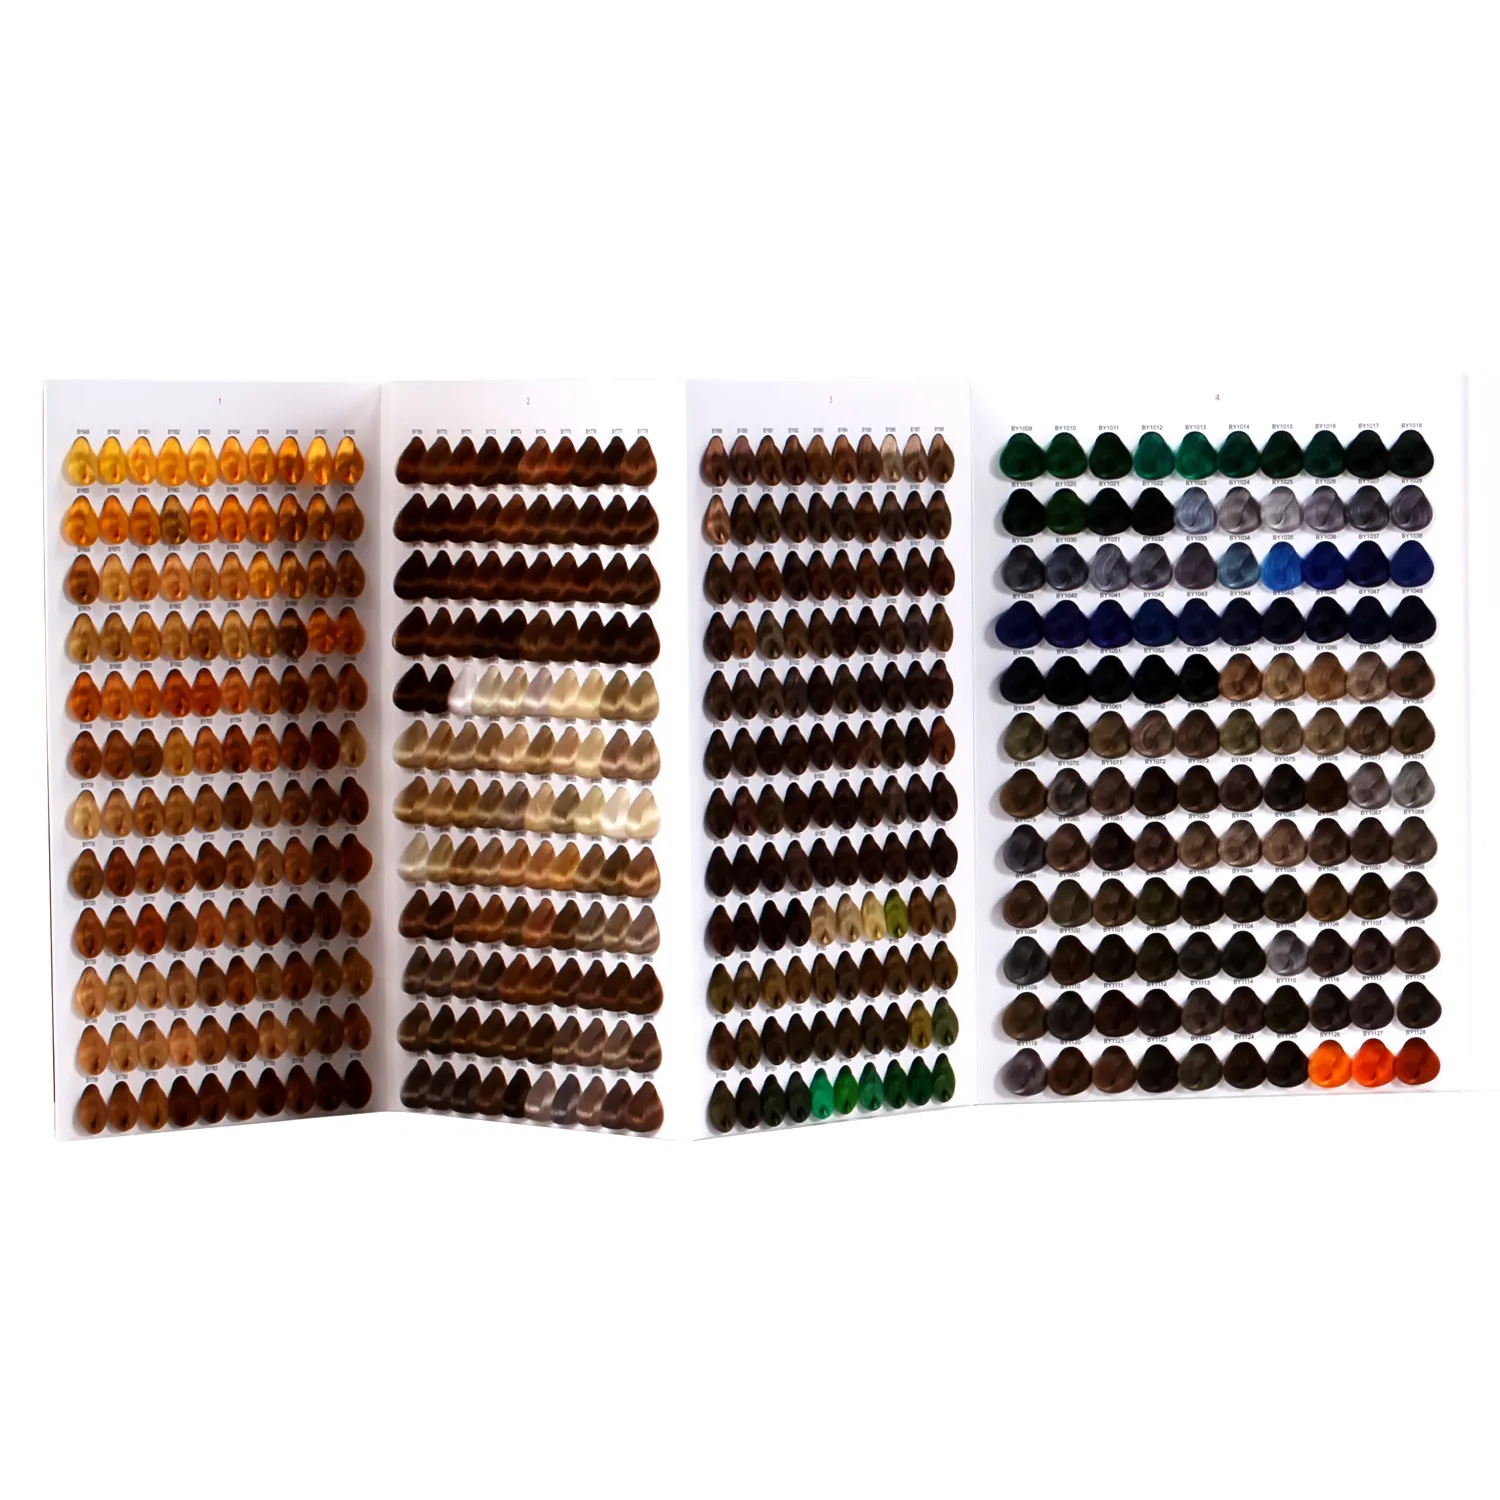 BOYAN 972 colors professional hair color mixing chart for hair swatch color choosing